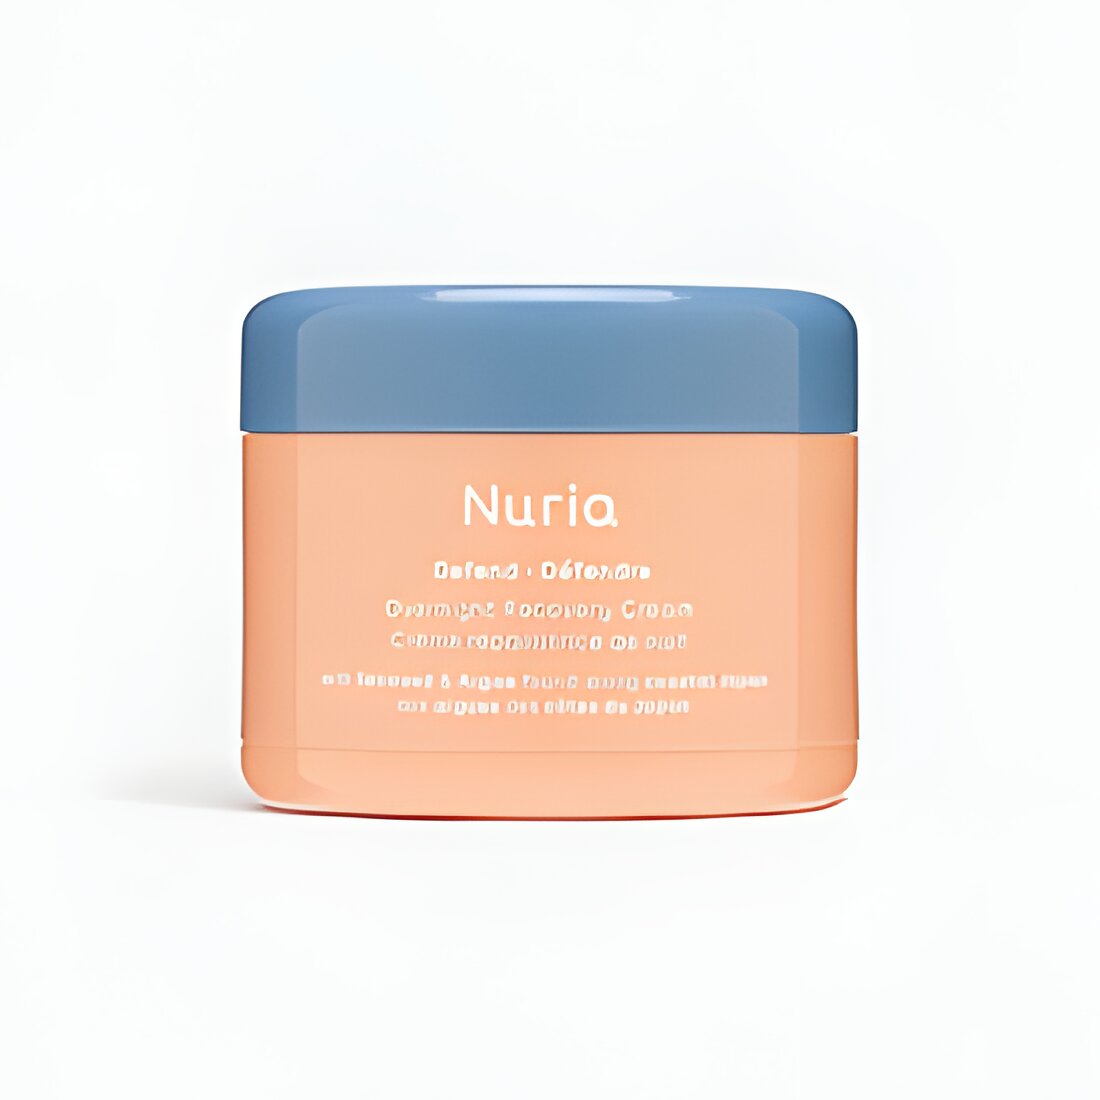 Free Defend Overnight Recovery Cream Sample From Nuria Beauty